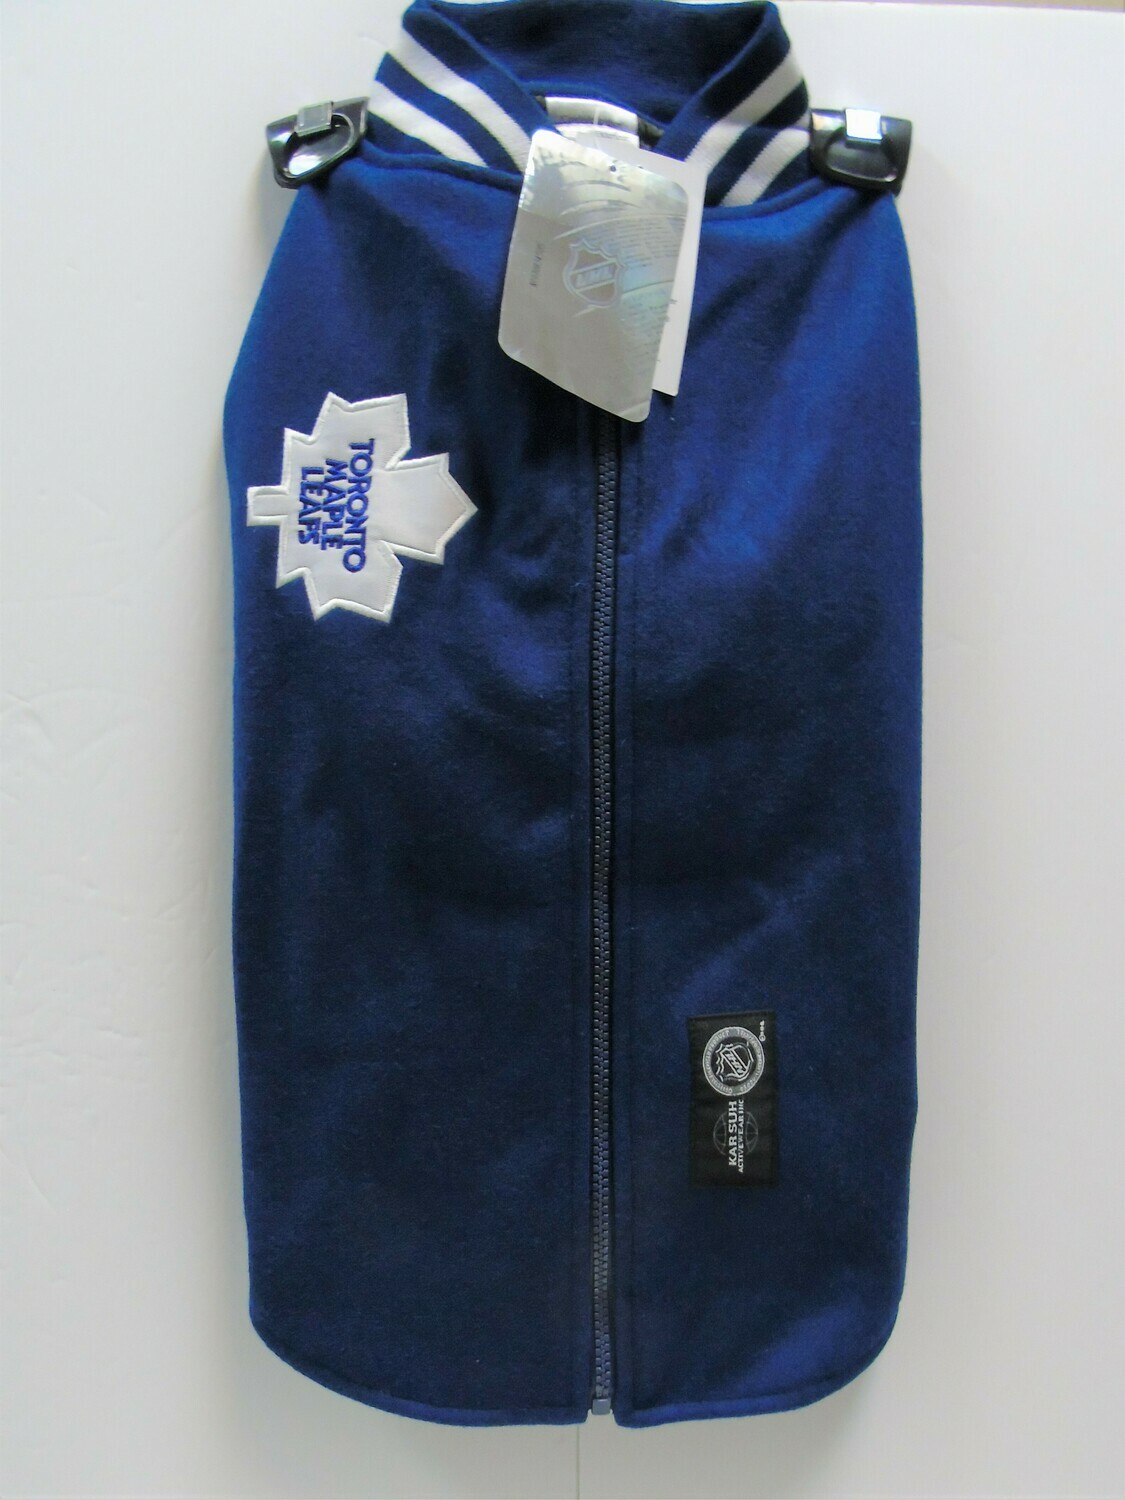 KARSUH - Maple Leaf Jacket W/Faux Leather Sleeves - Size XL